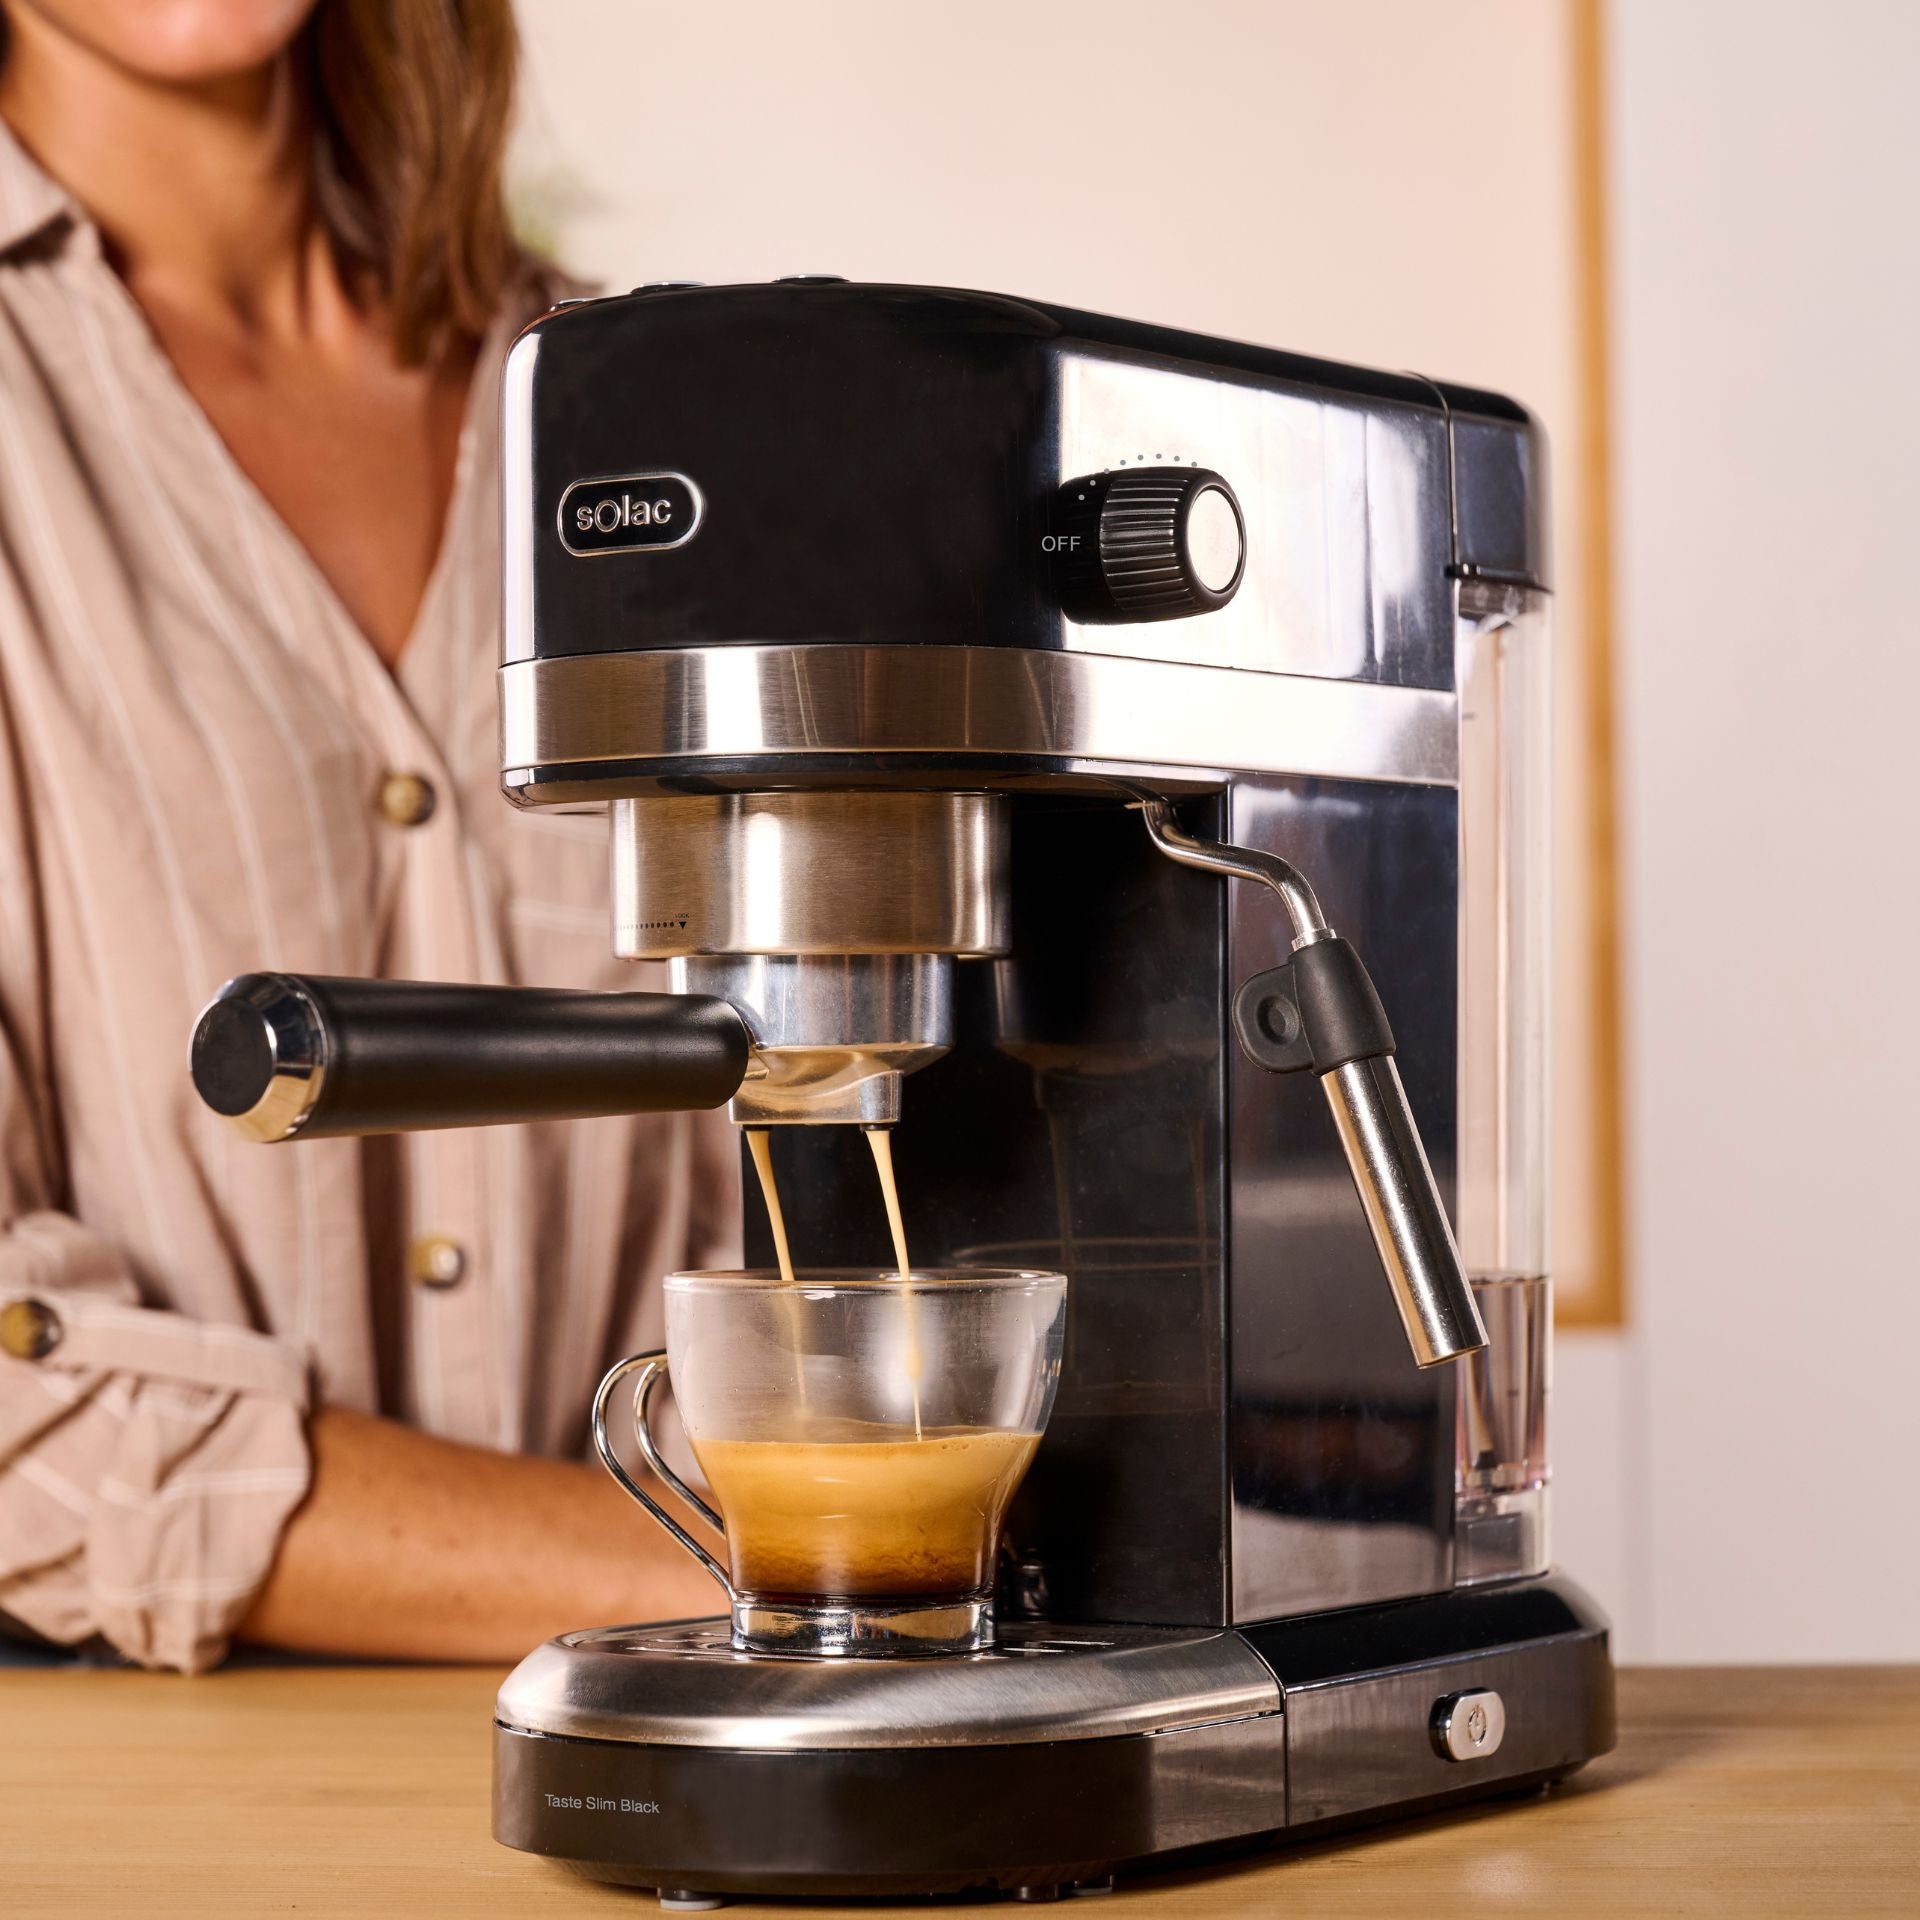 Cafetera Express Solac CE4510